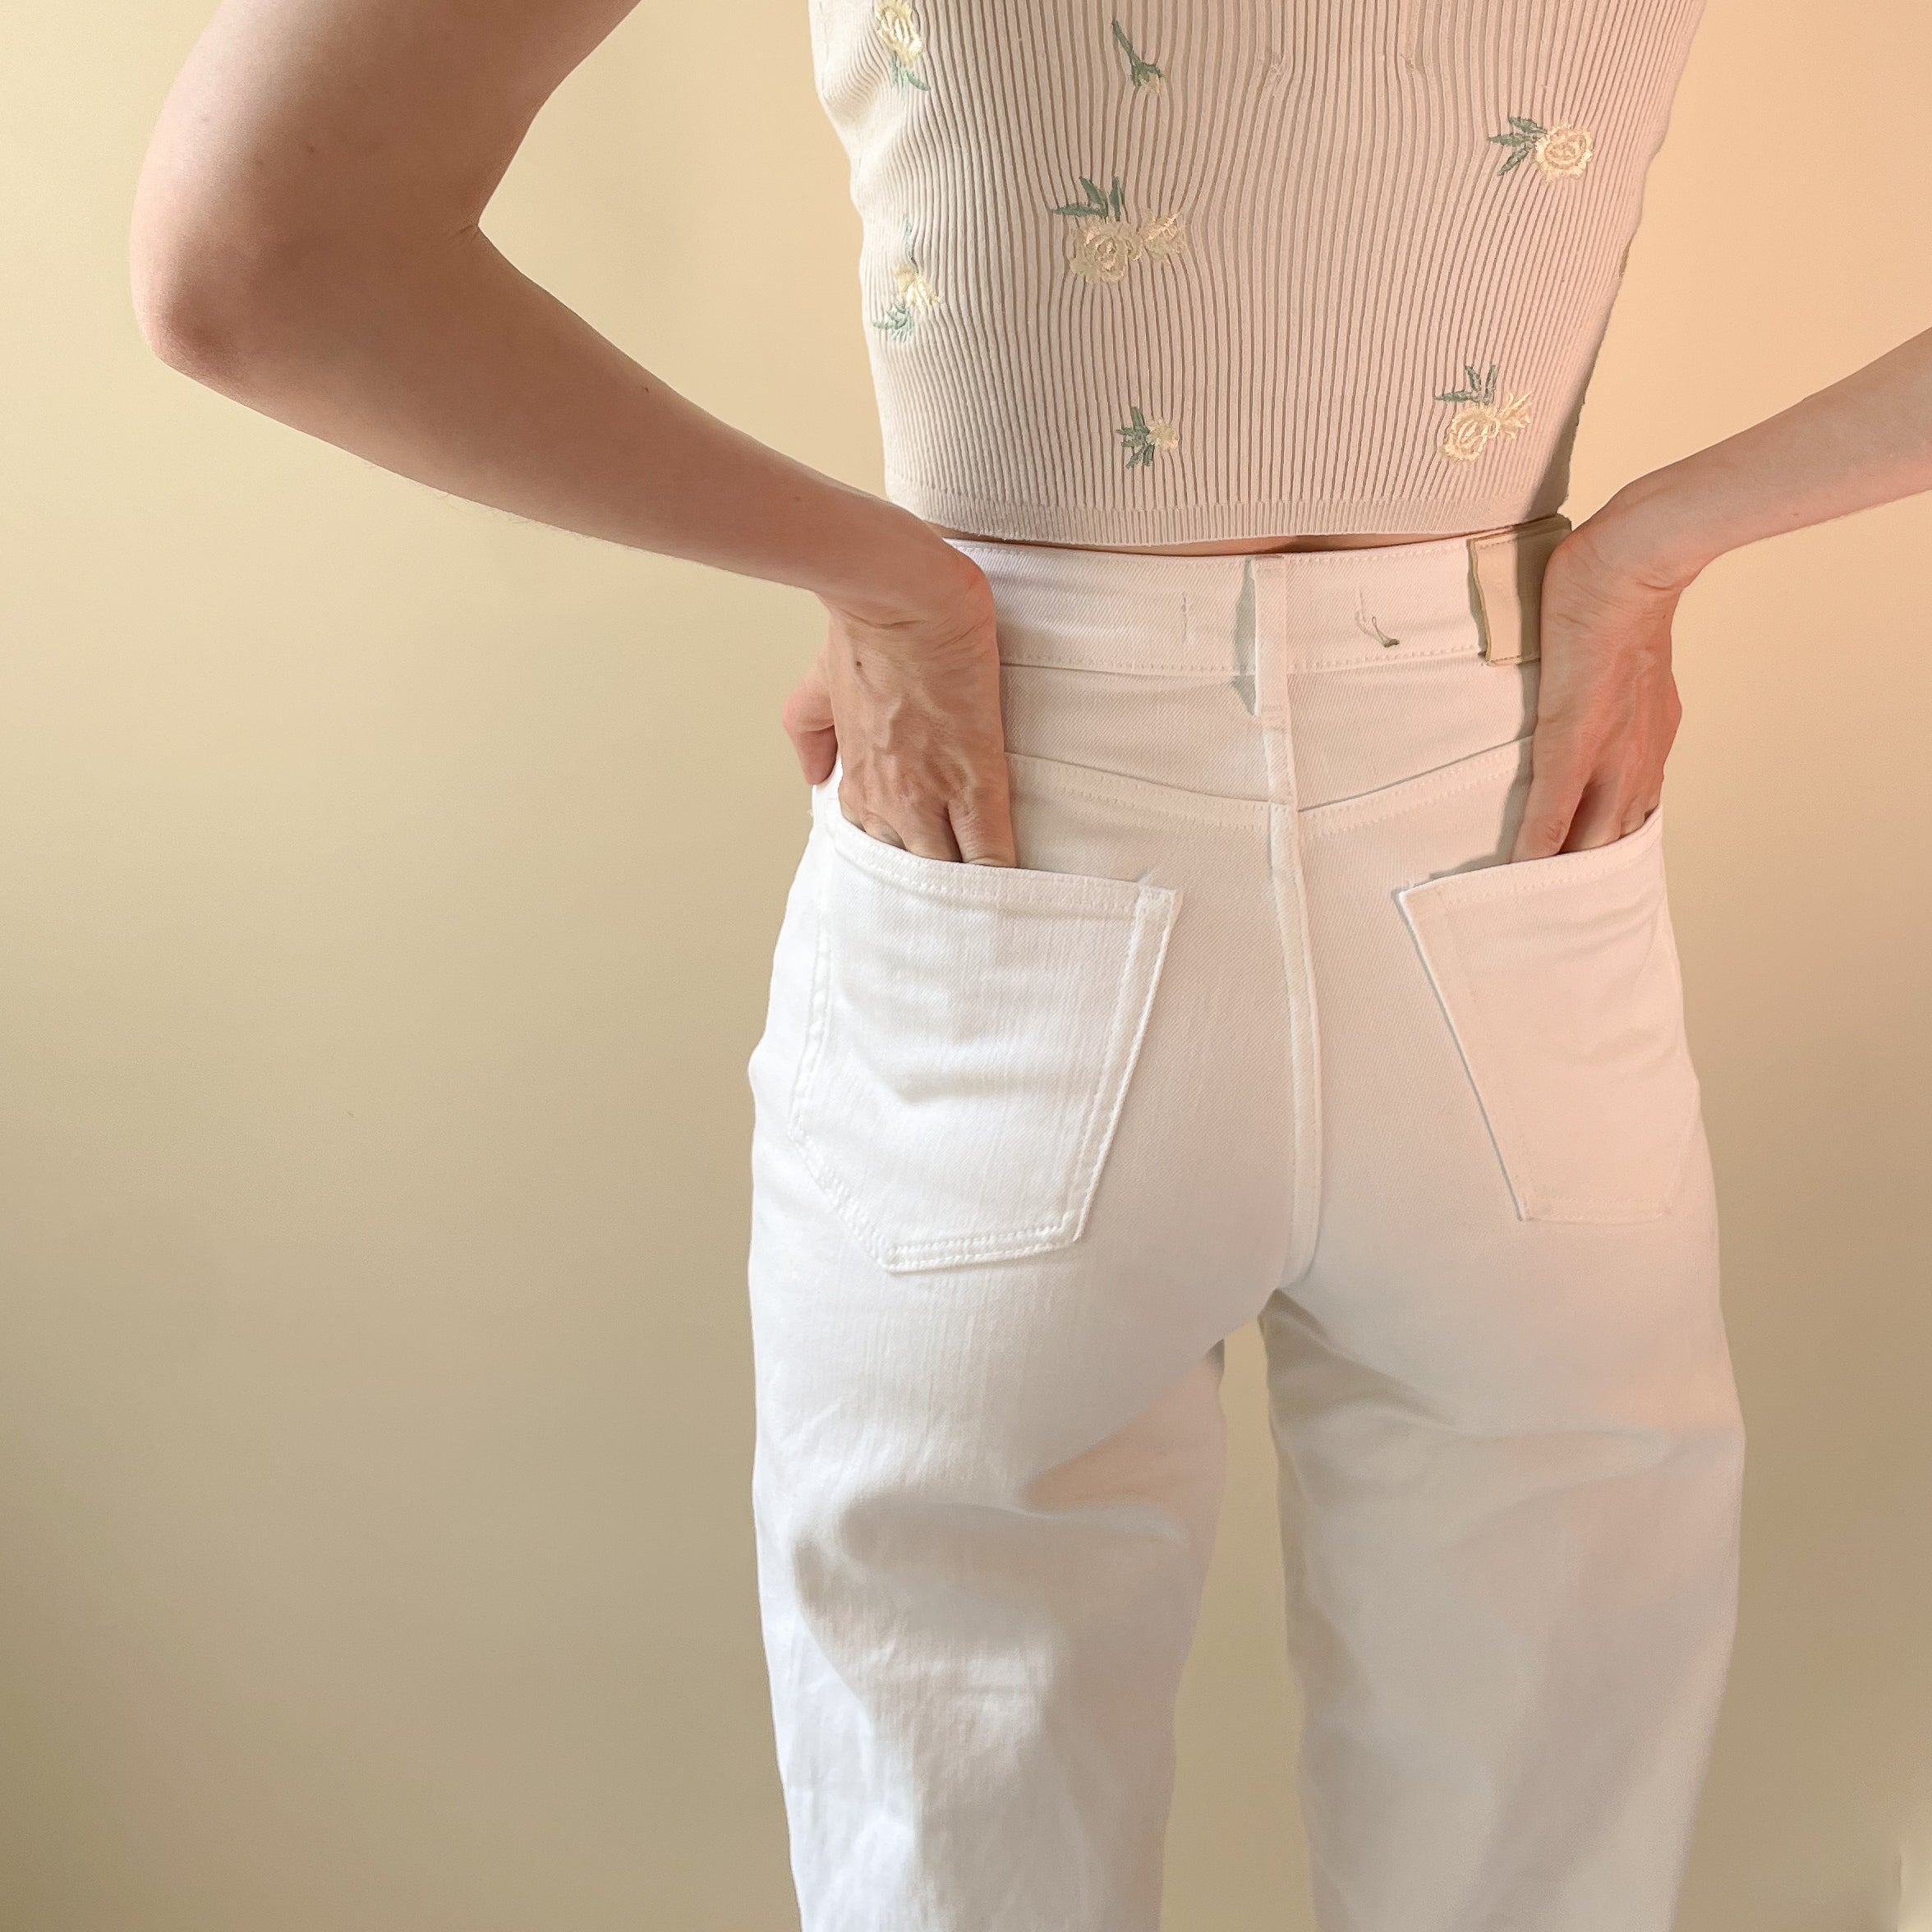 Women in white jeans from behind showing that it is not possible to see dais period underwear through jeans. 